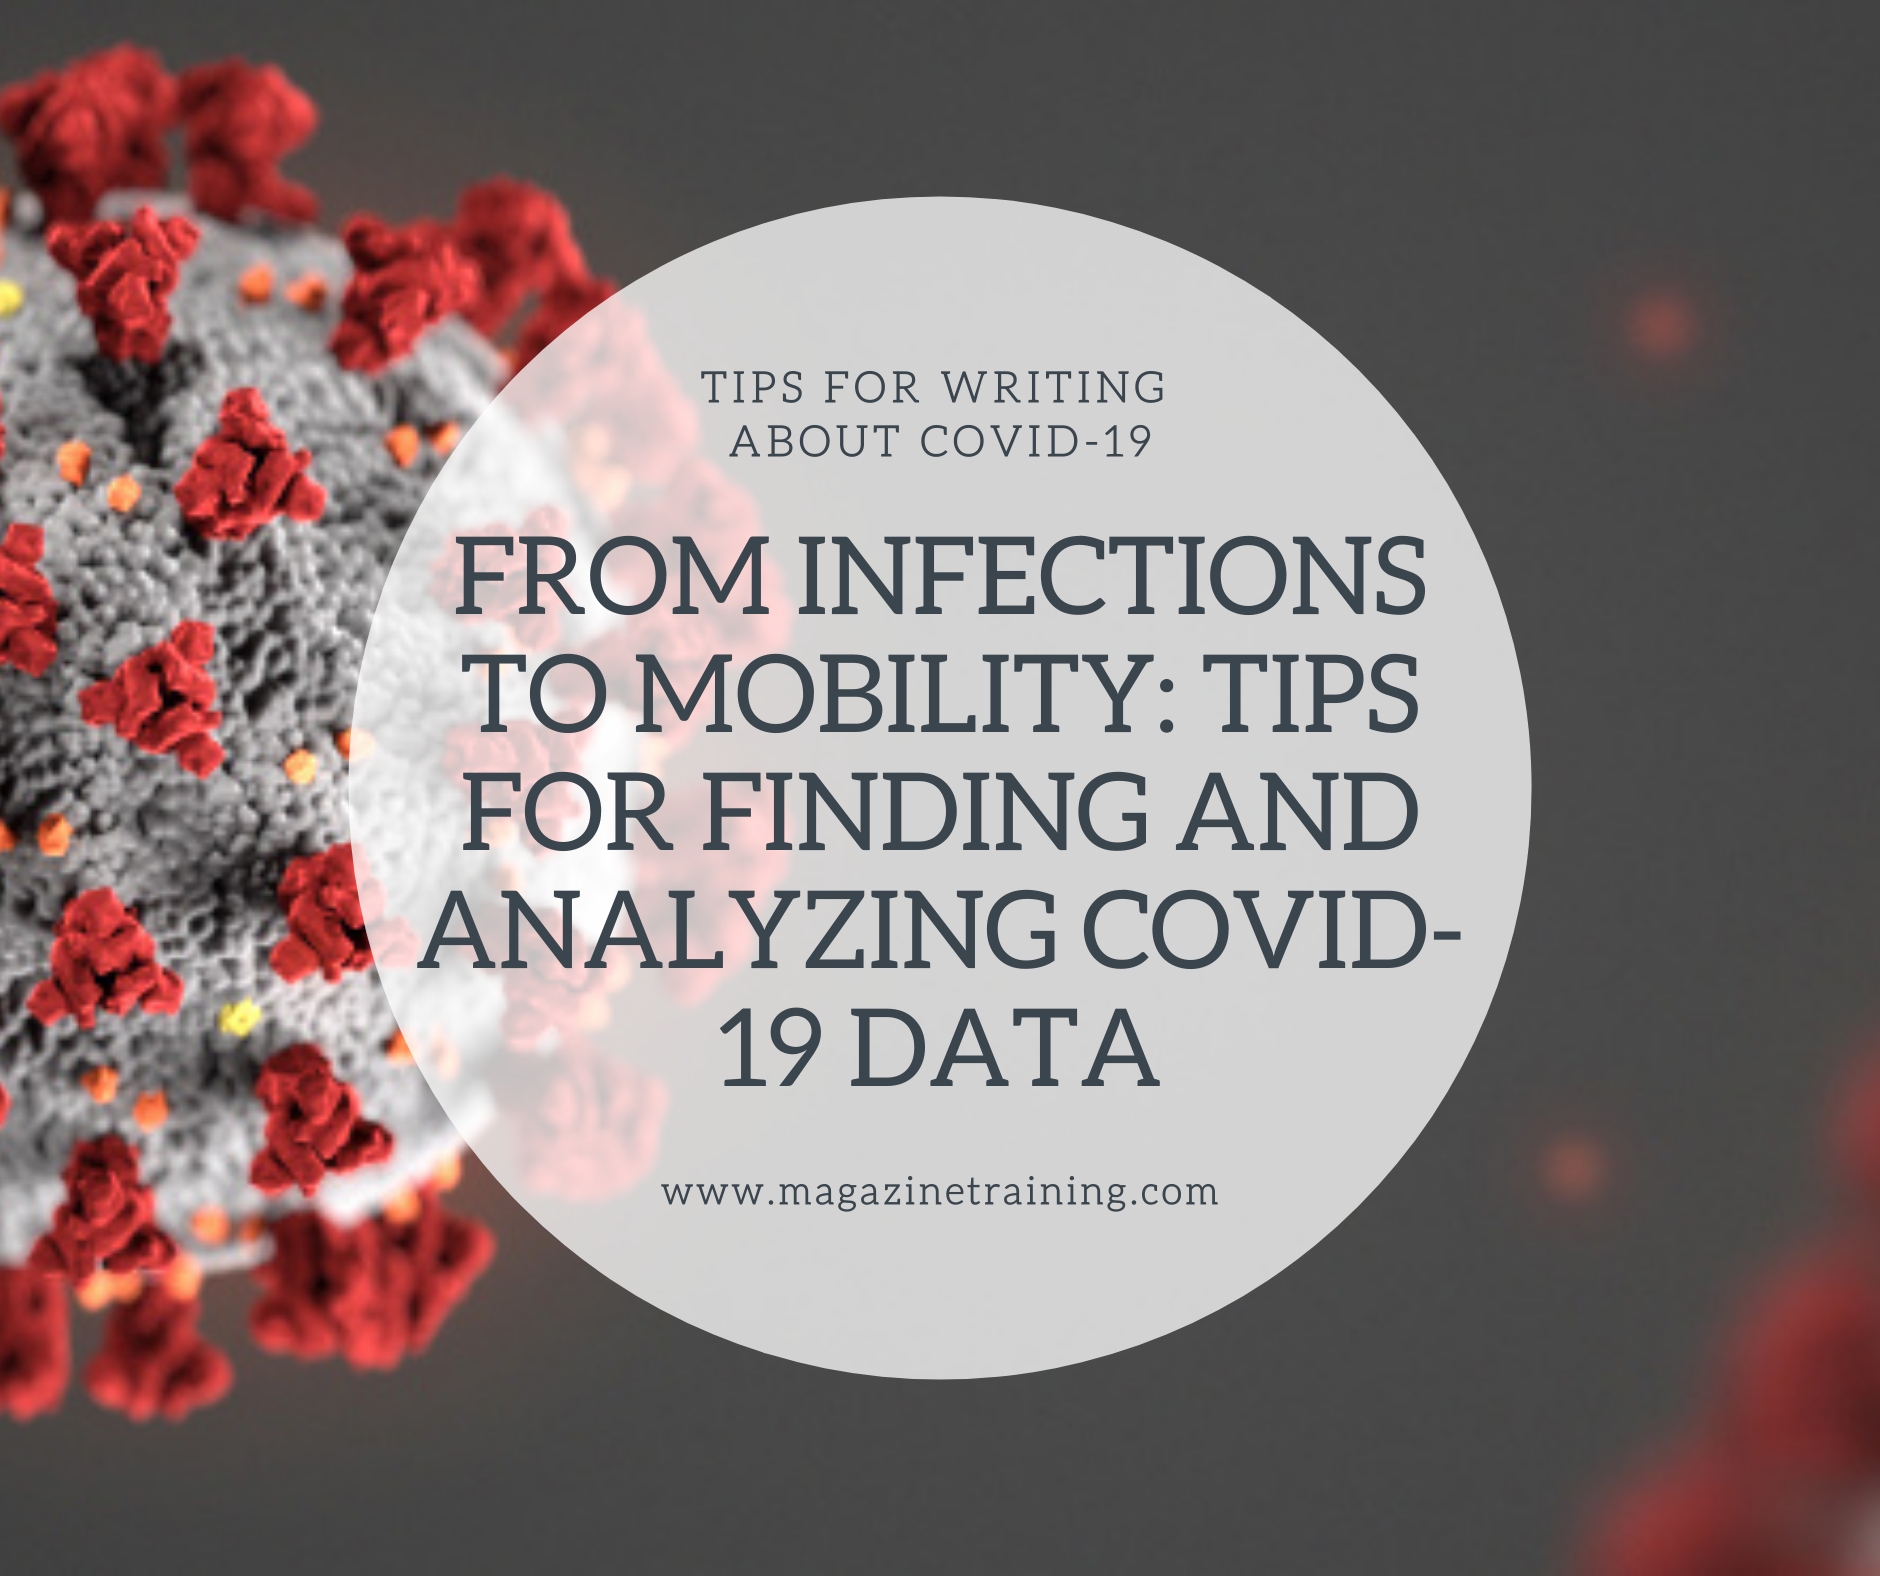 finding and analyzing COVID-19 data